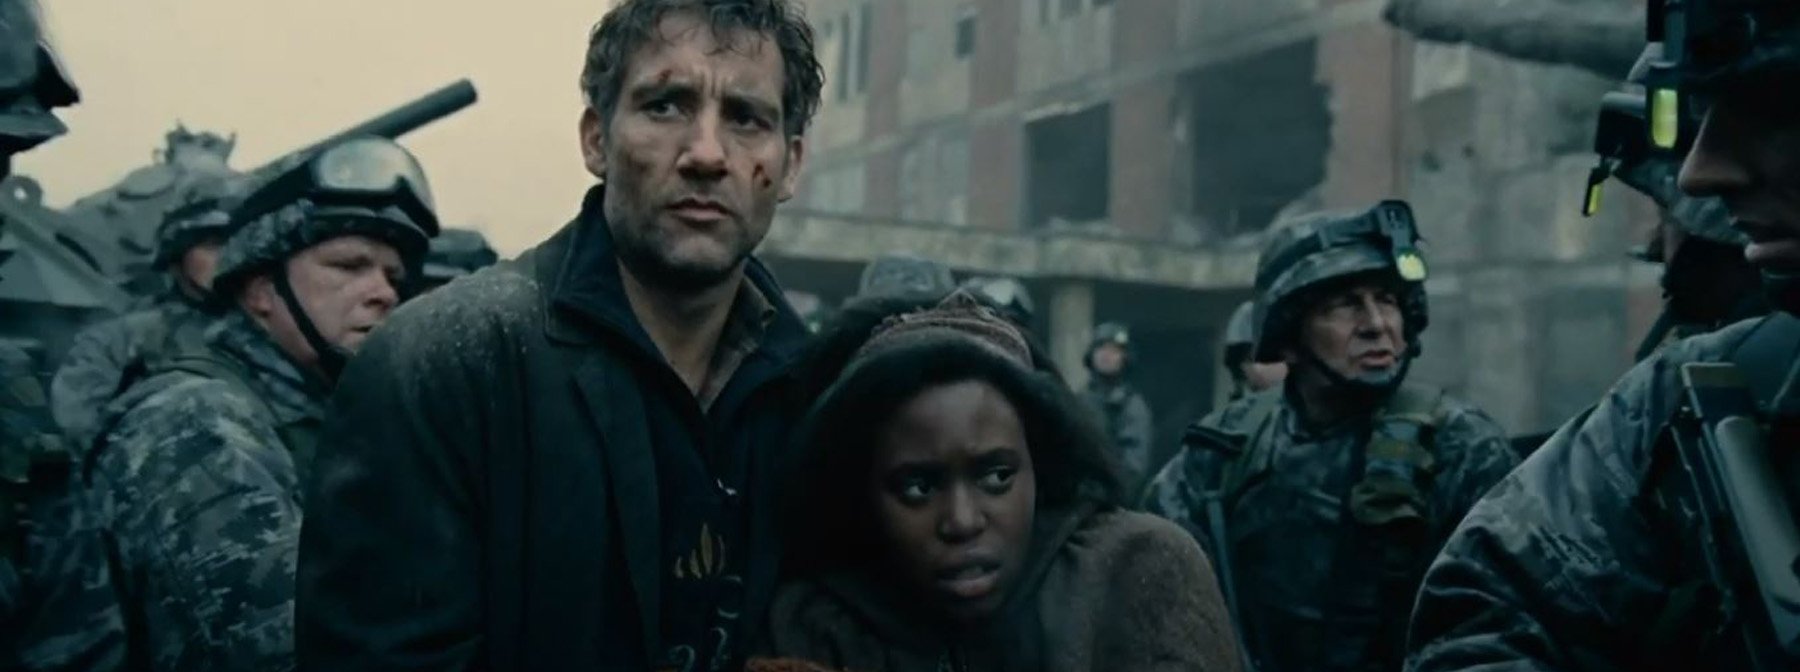 Theo (Clive Owen) and Kee (Clare-Hope Ashitey) in Children of Men (2006)